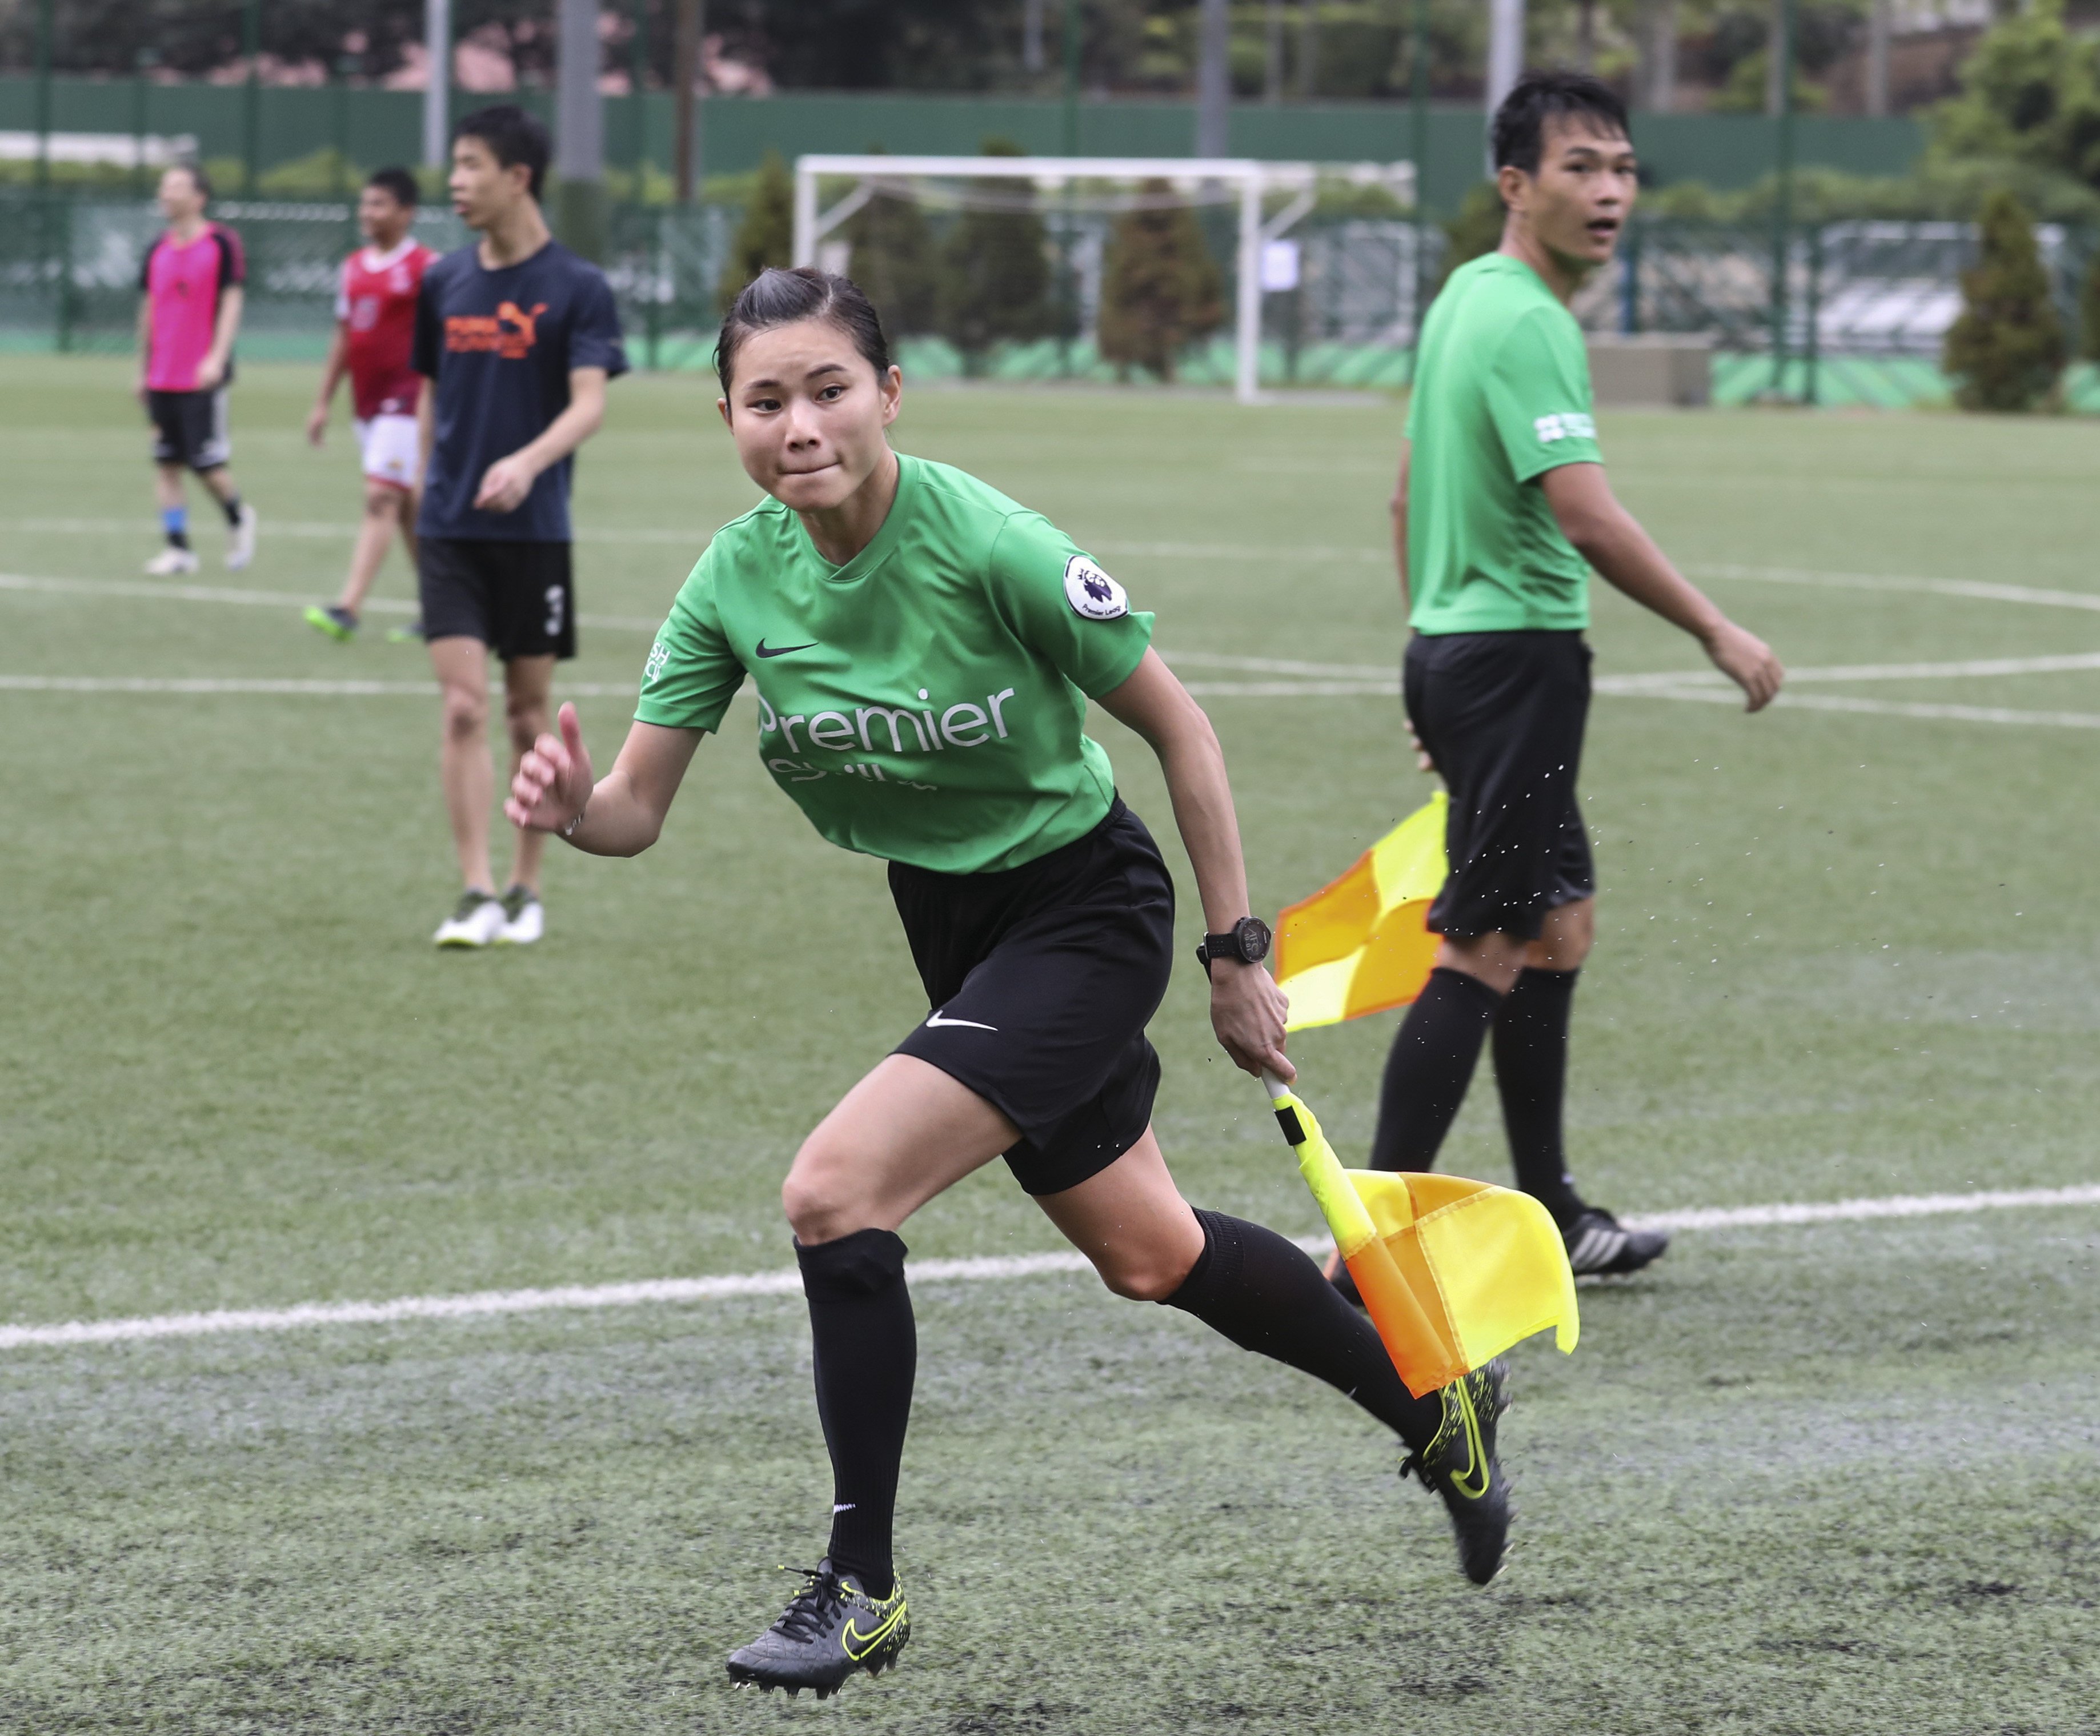 Sex and sport in Hong Kong